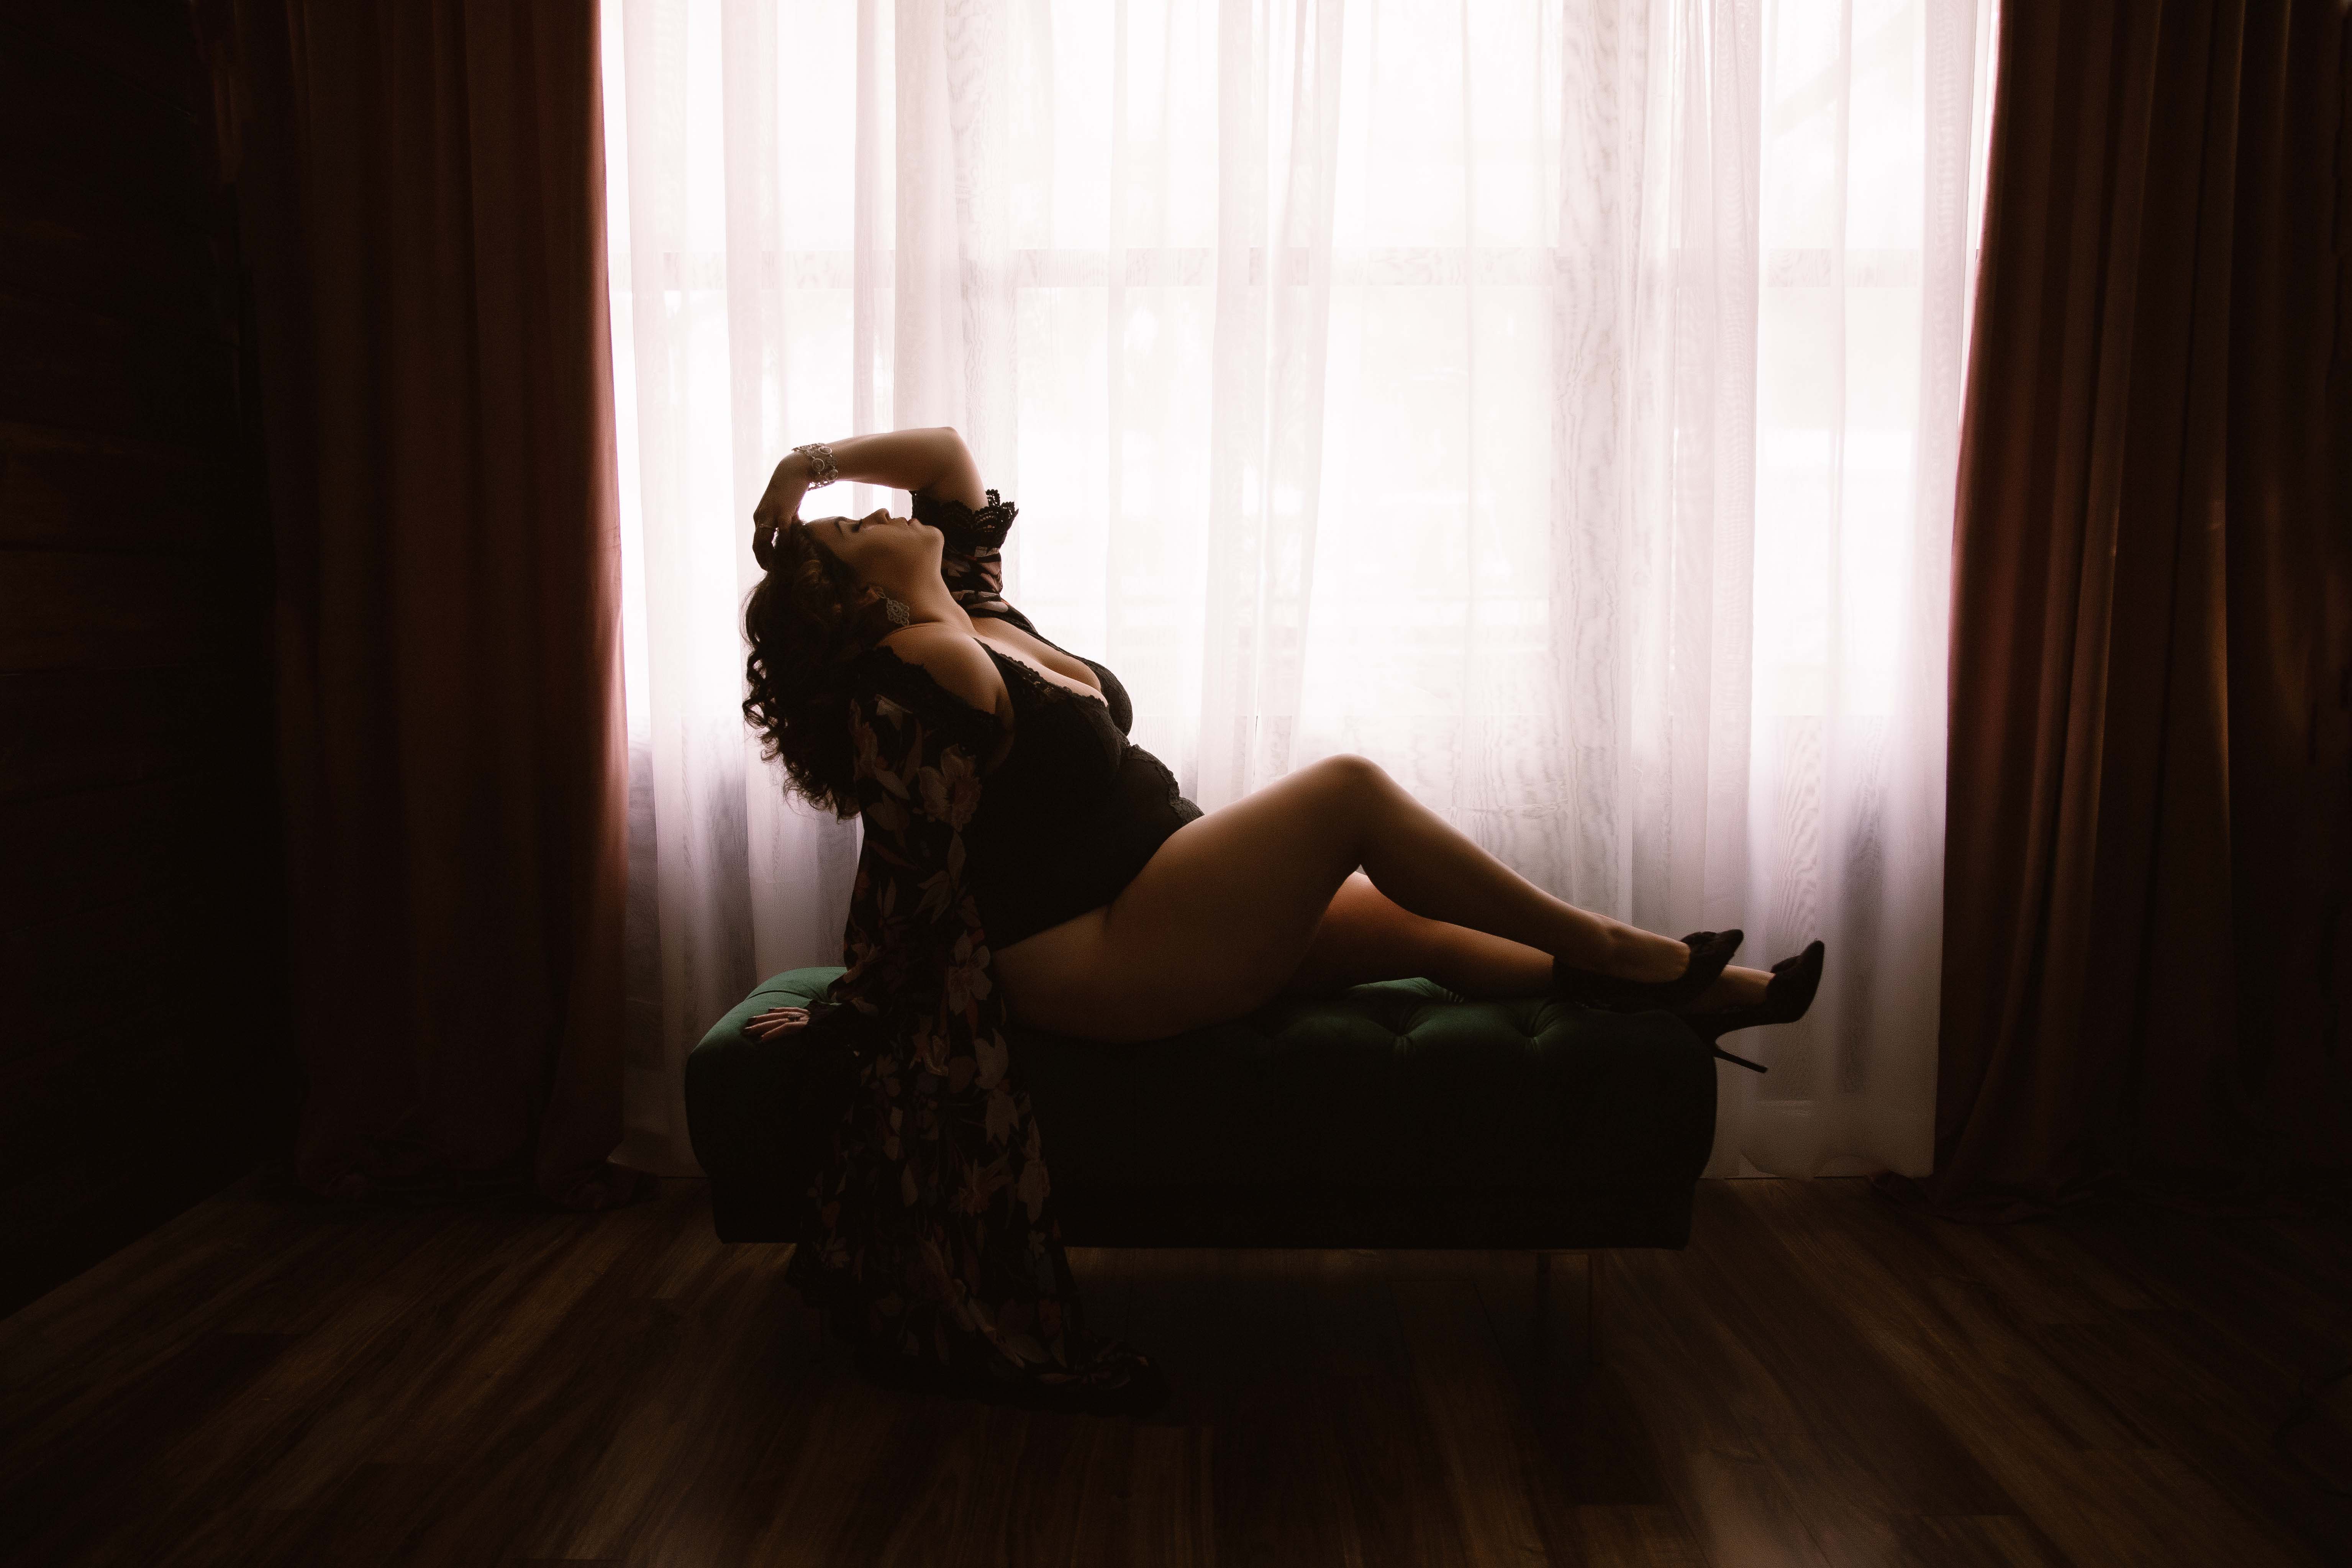 Silhouette of a woman posing in front of window for a boudoir photoshoot